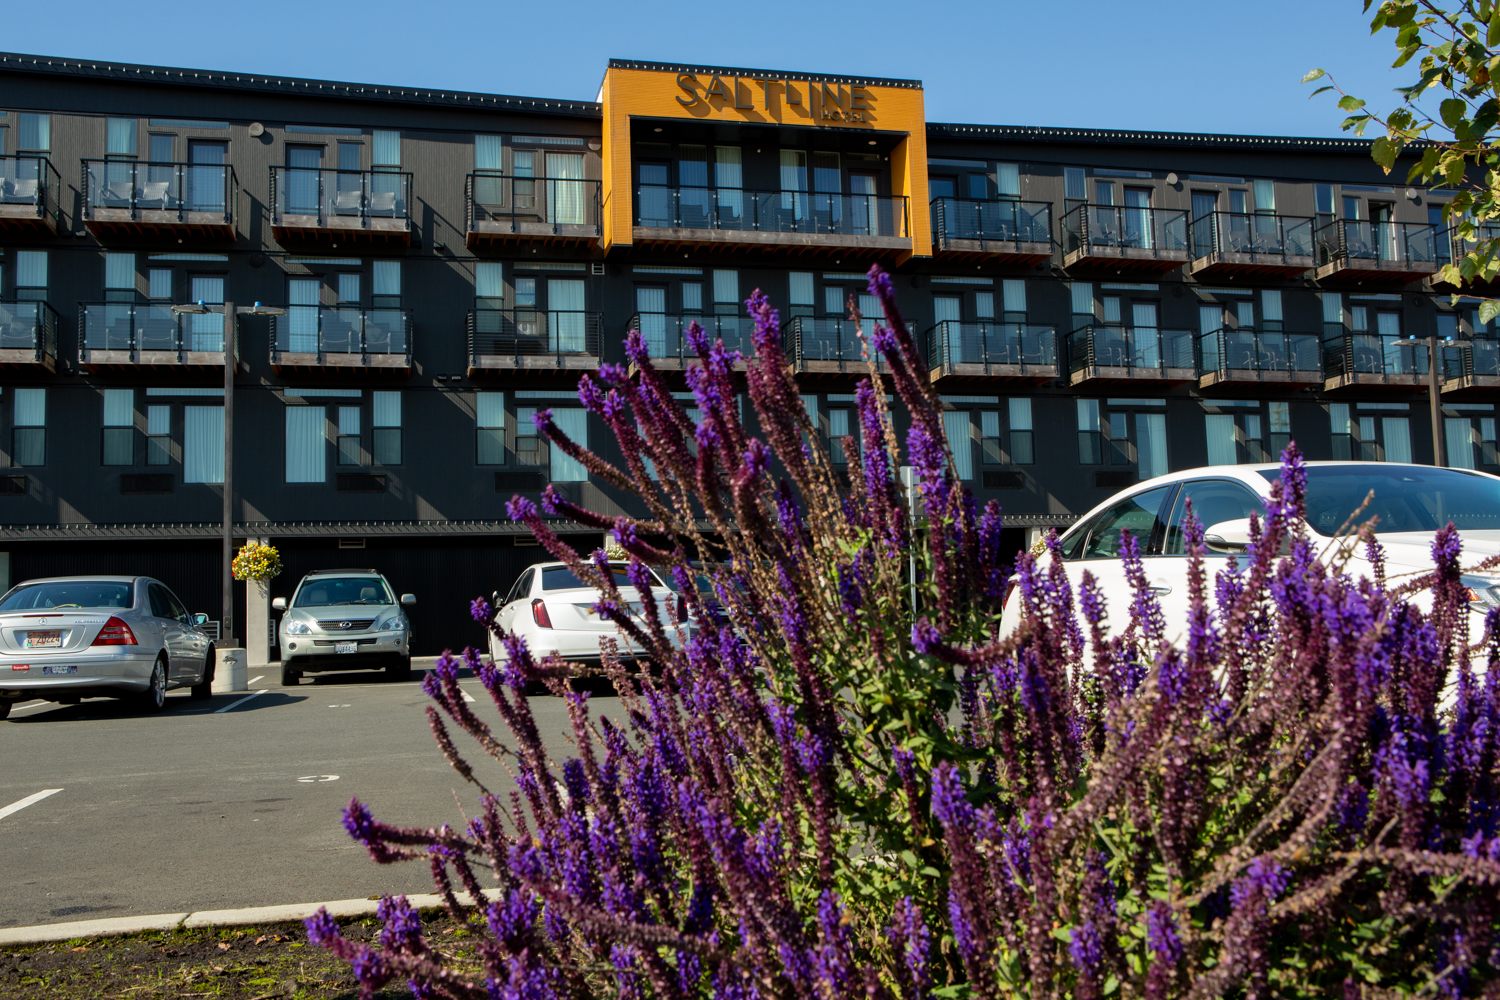 Oregon Coast’s SaltLine Hotel has built in energy efficiency from day one